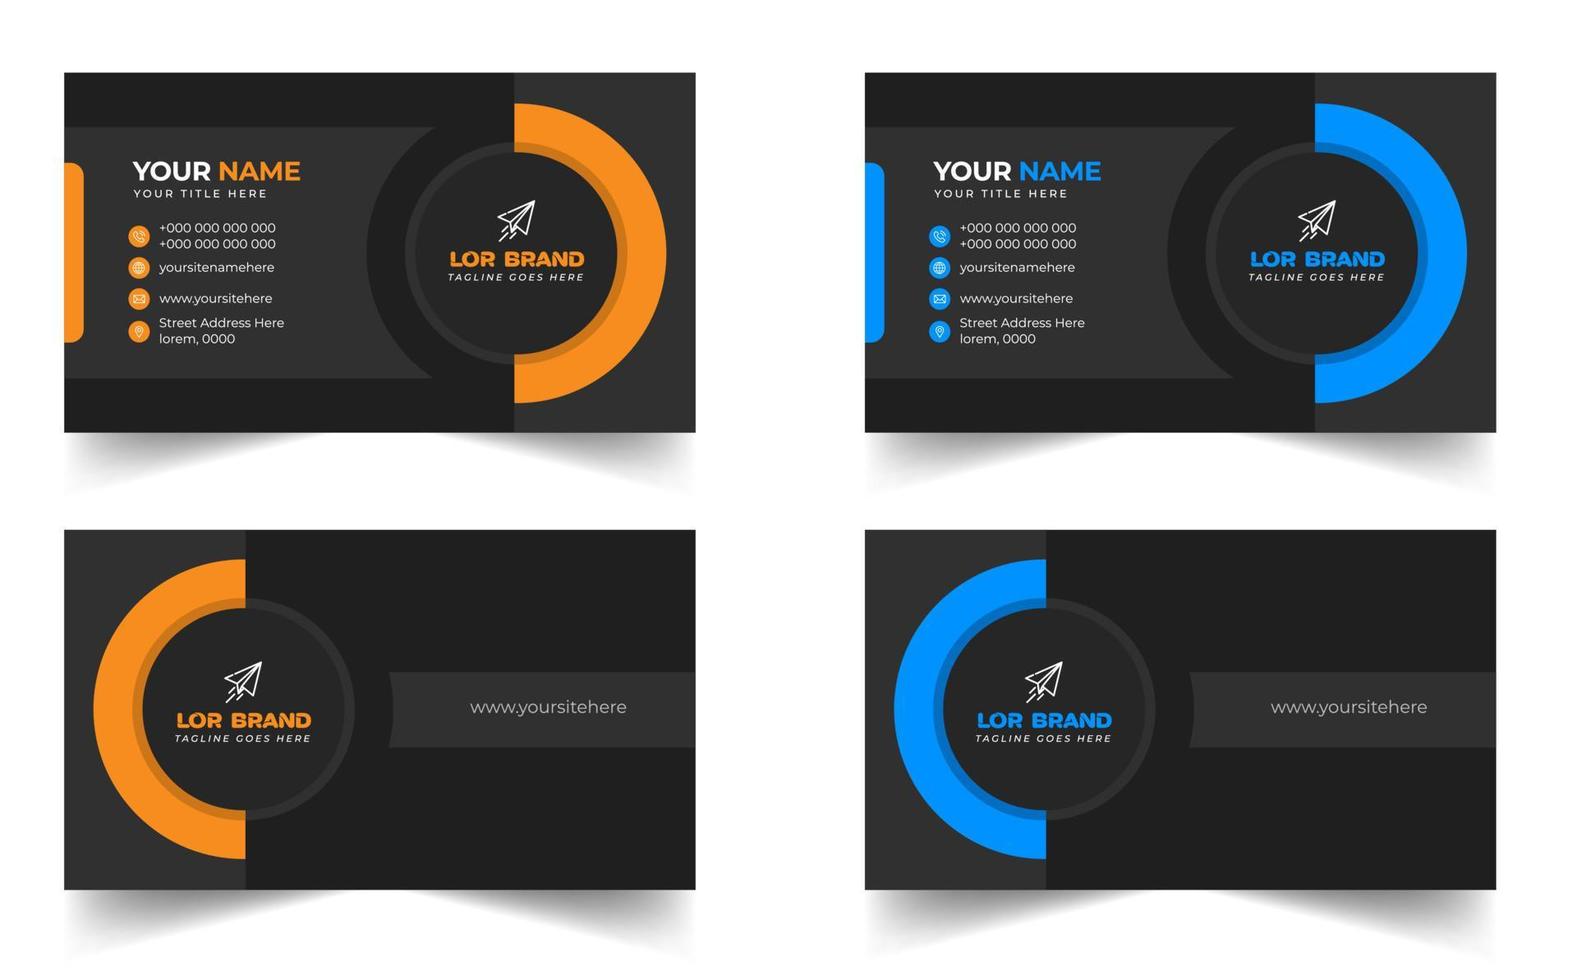 blue-and-yellow-modern-creative-business-card-design-template-unique-shape-modern-business-card-design-free-vector